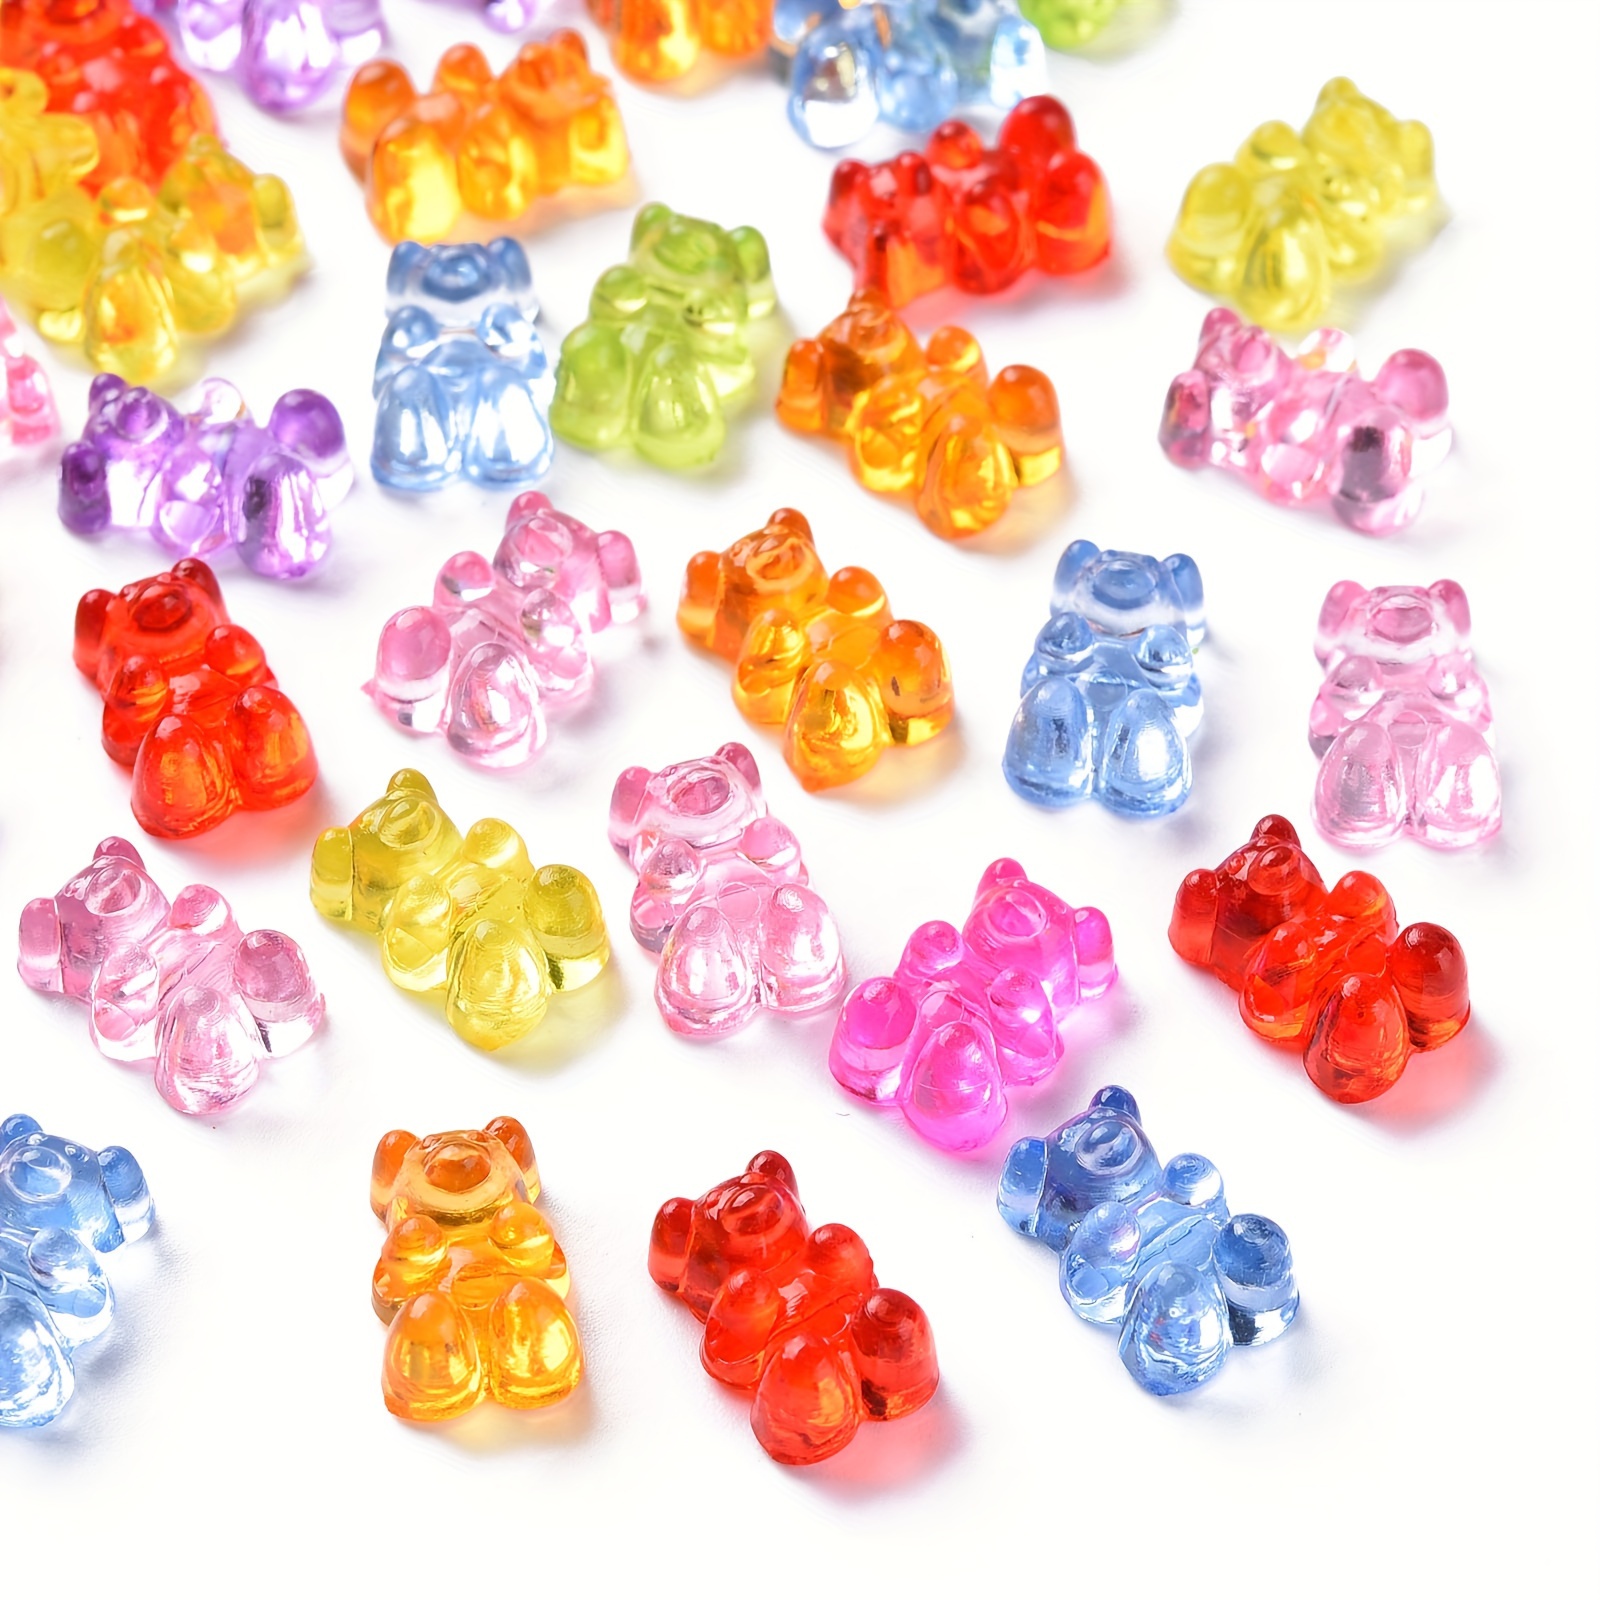 Candy Charms - 32 Pcs Mulicolor Assorted Resin Mixed Bear Charms for  Jewelry Making Necklace Bracelet Earring DIY Crafting Supplies